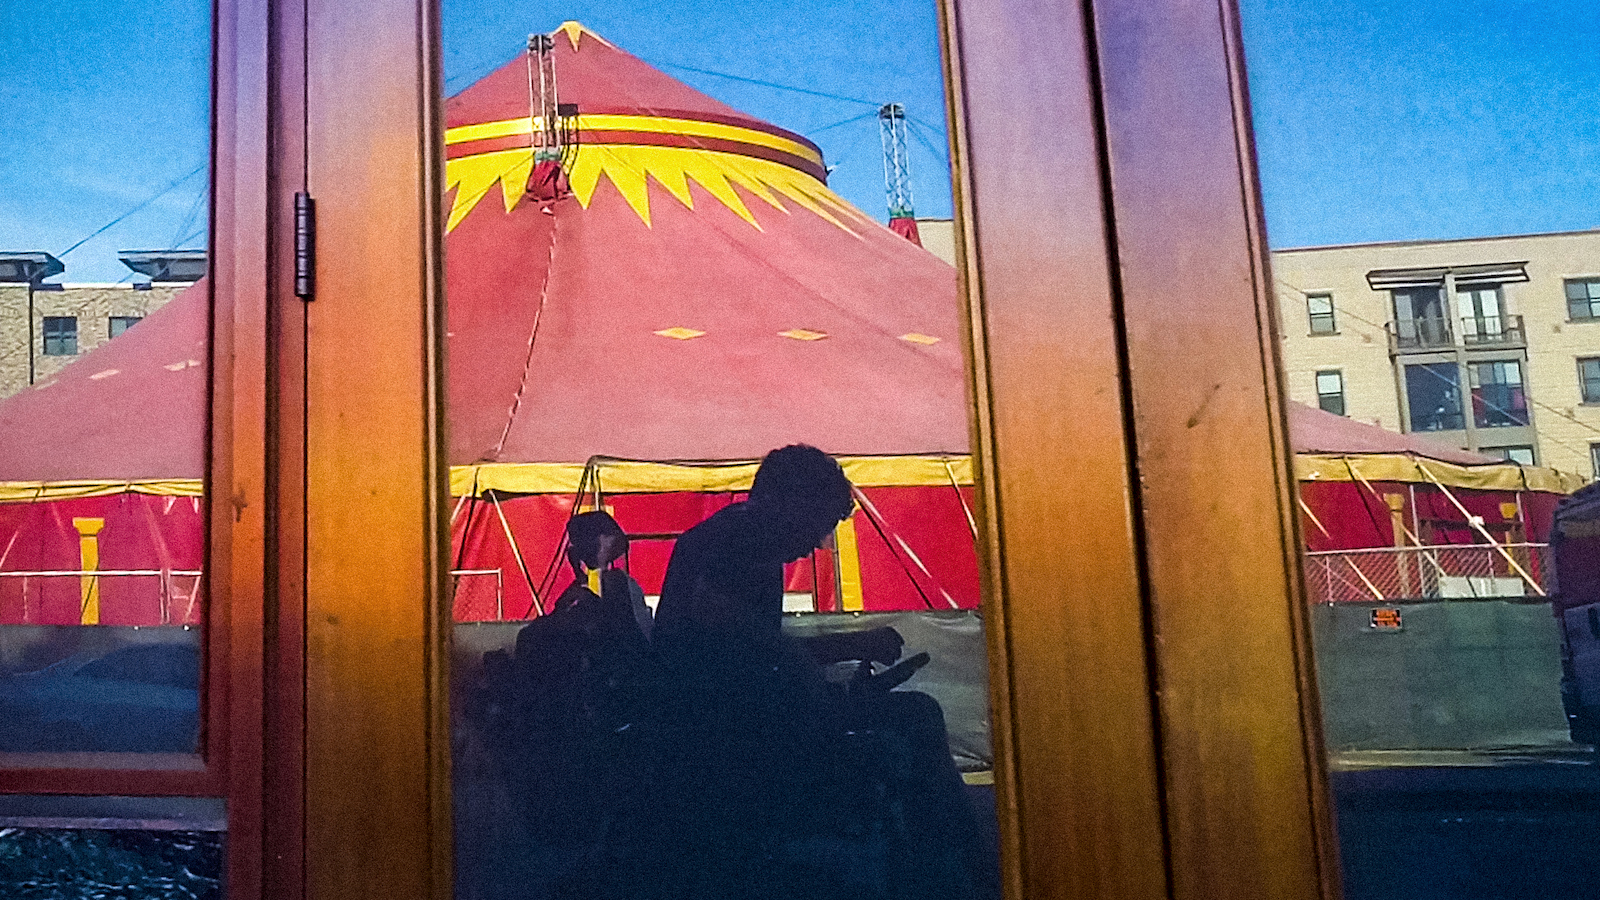 A reflection in a doorway of a man in a wheelchair, set against a red and yellow circus tent